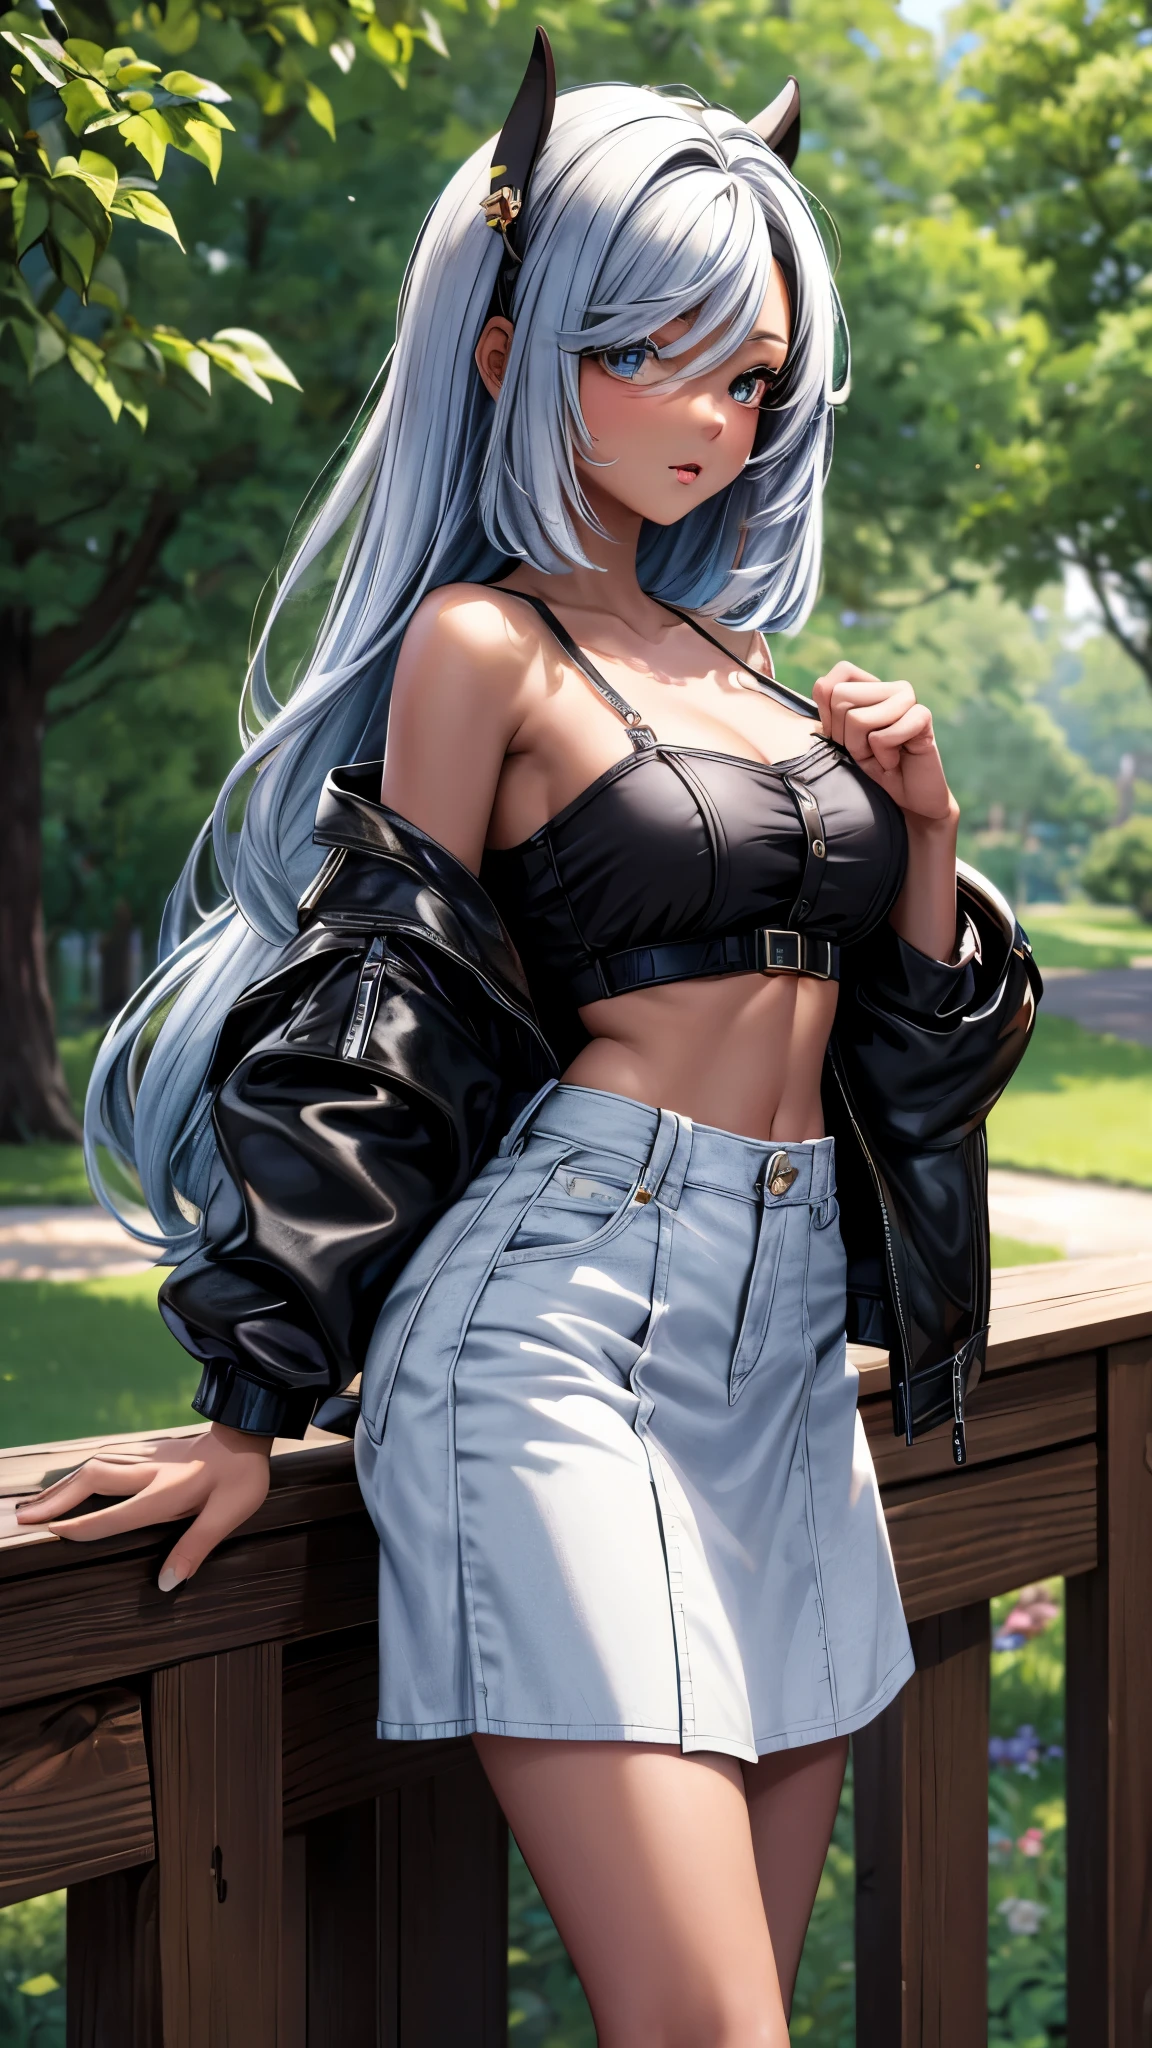 Masterpiece of the Highest Quality, High Resolution (4K), an Exquisite Portrayal of a Charming and Enchanting Coffee-Colored Black-Skinned Adolescent Lolita:

She is in the park wearing sexy and alluring casual clothes mini skirt and midriff spaghetti strap lady techno jacket